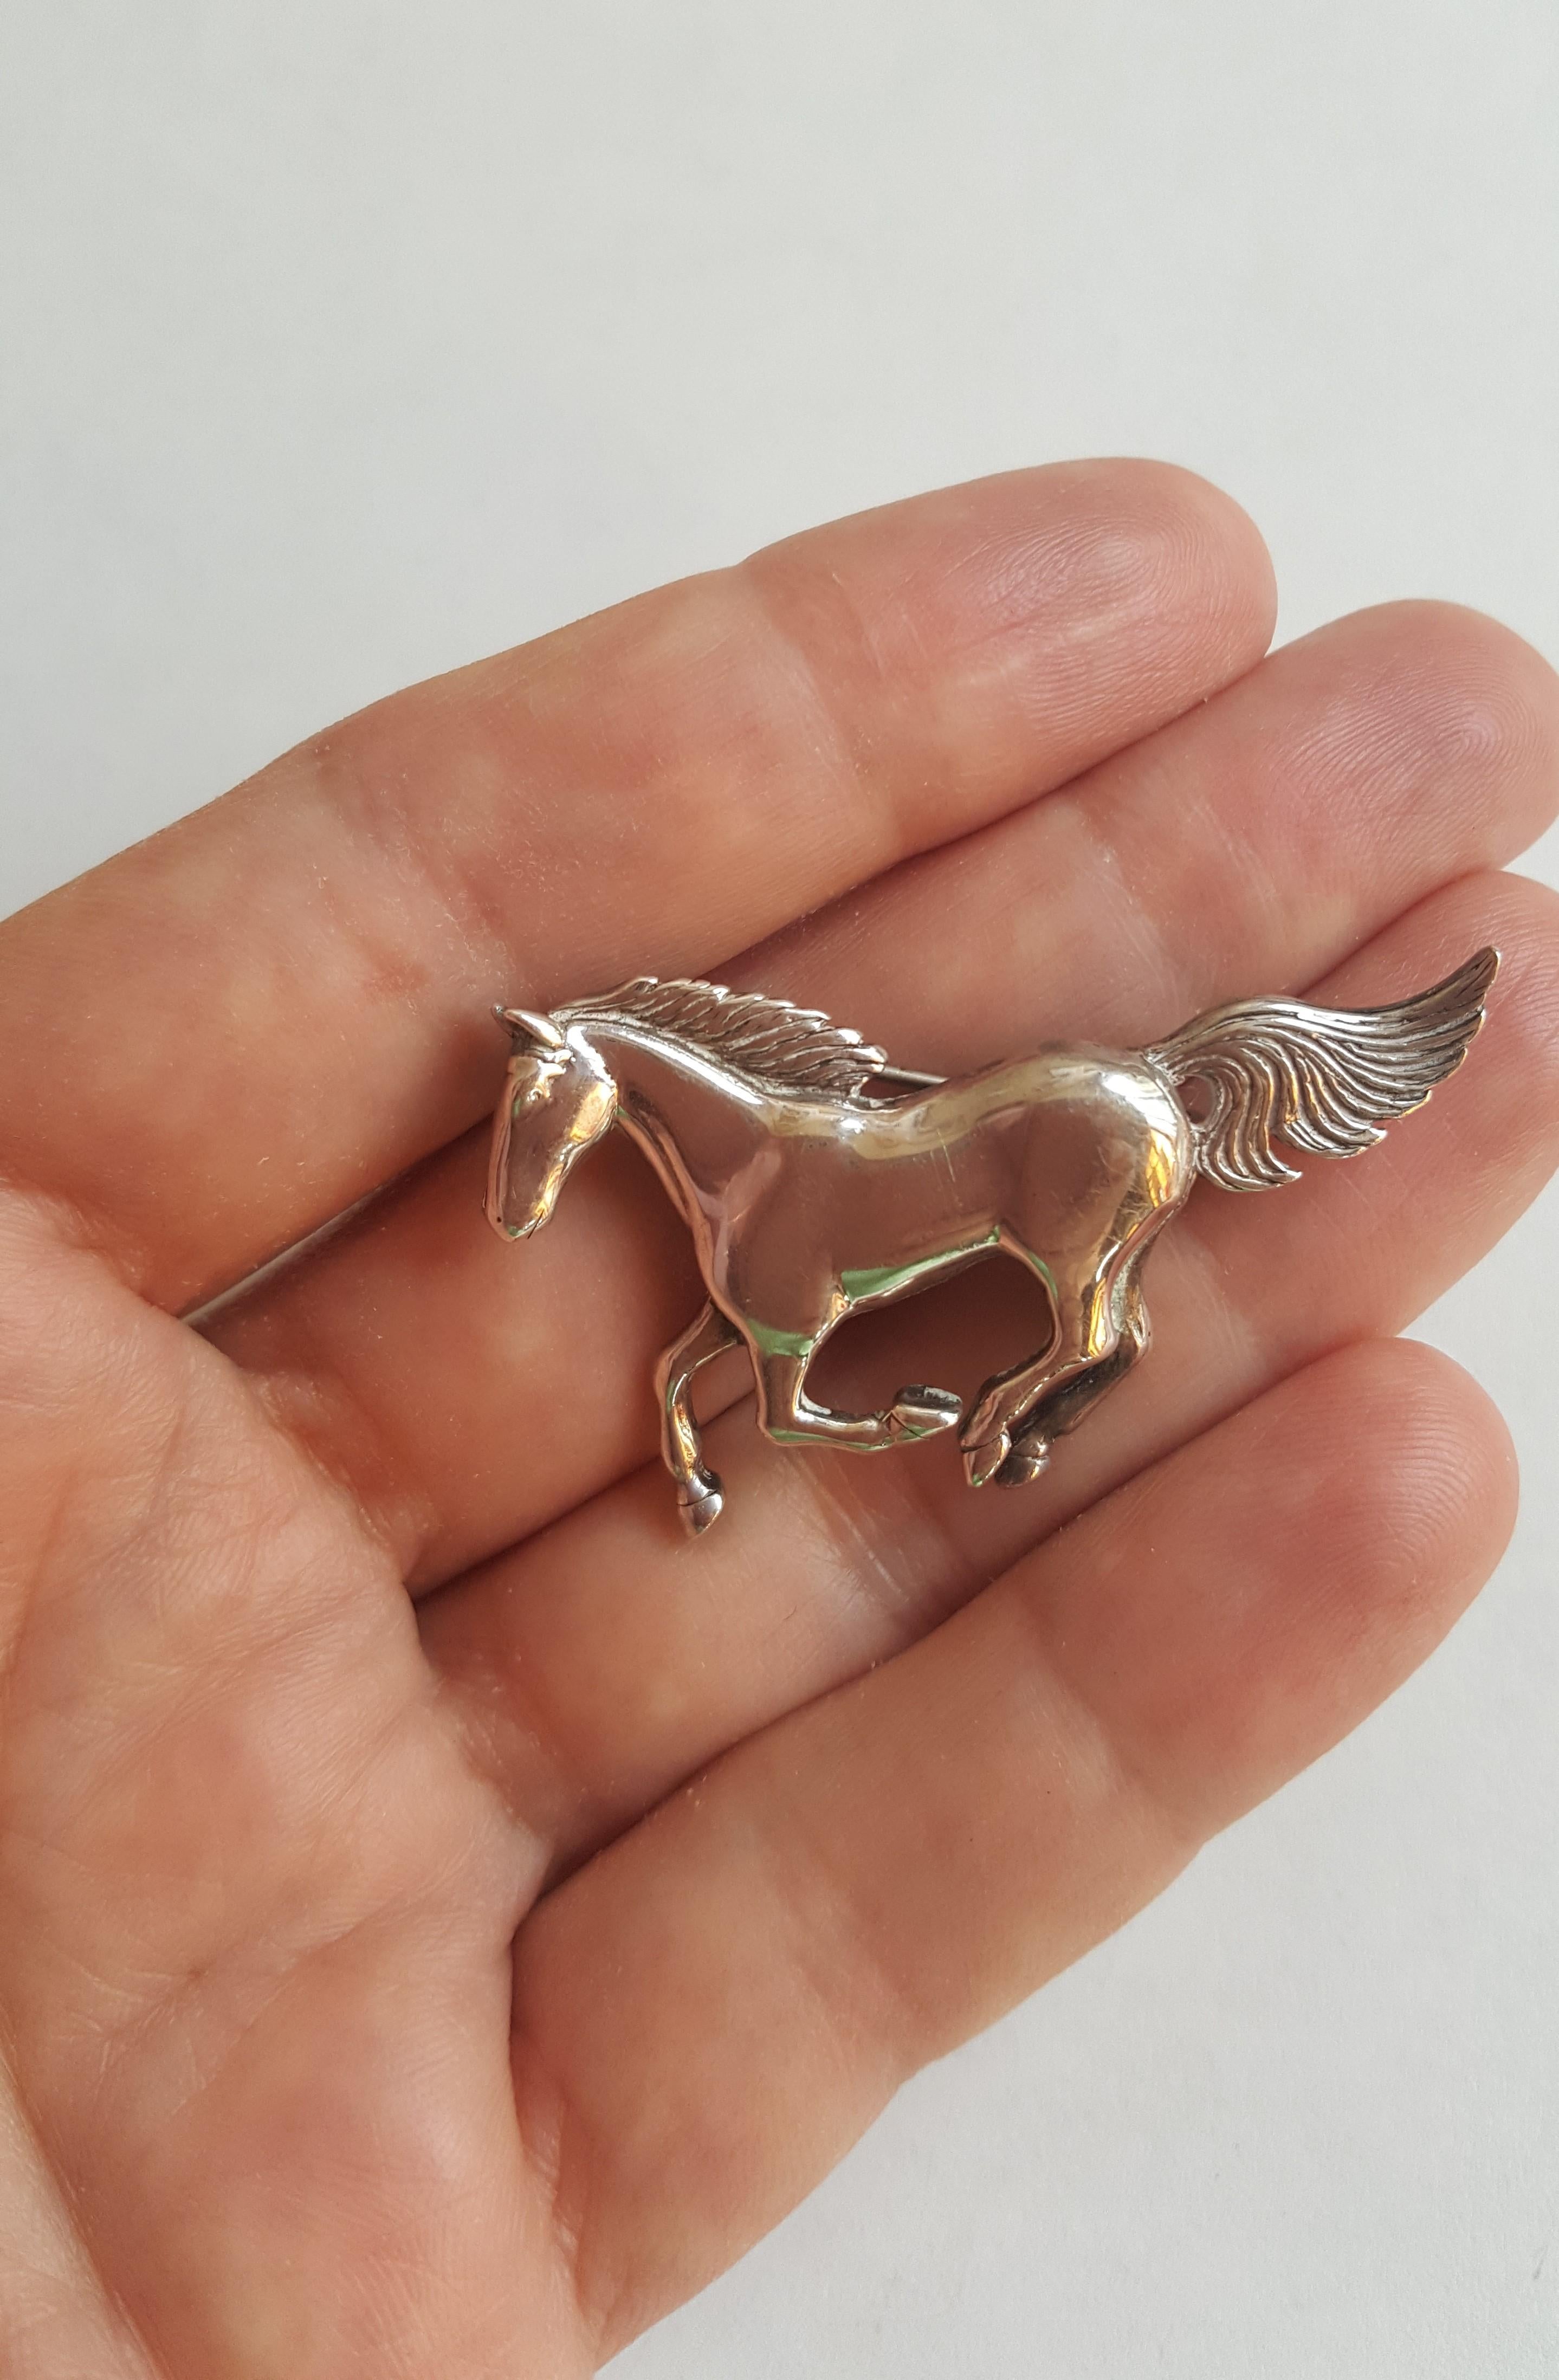 American Indian Navajo Artist Glen Sandoval Sterling Silver Horse Pin, 1 3/4 inches x 1 inch, 10.5 grams, Very Good Conditional, Beautiful Running Horse